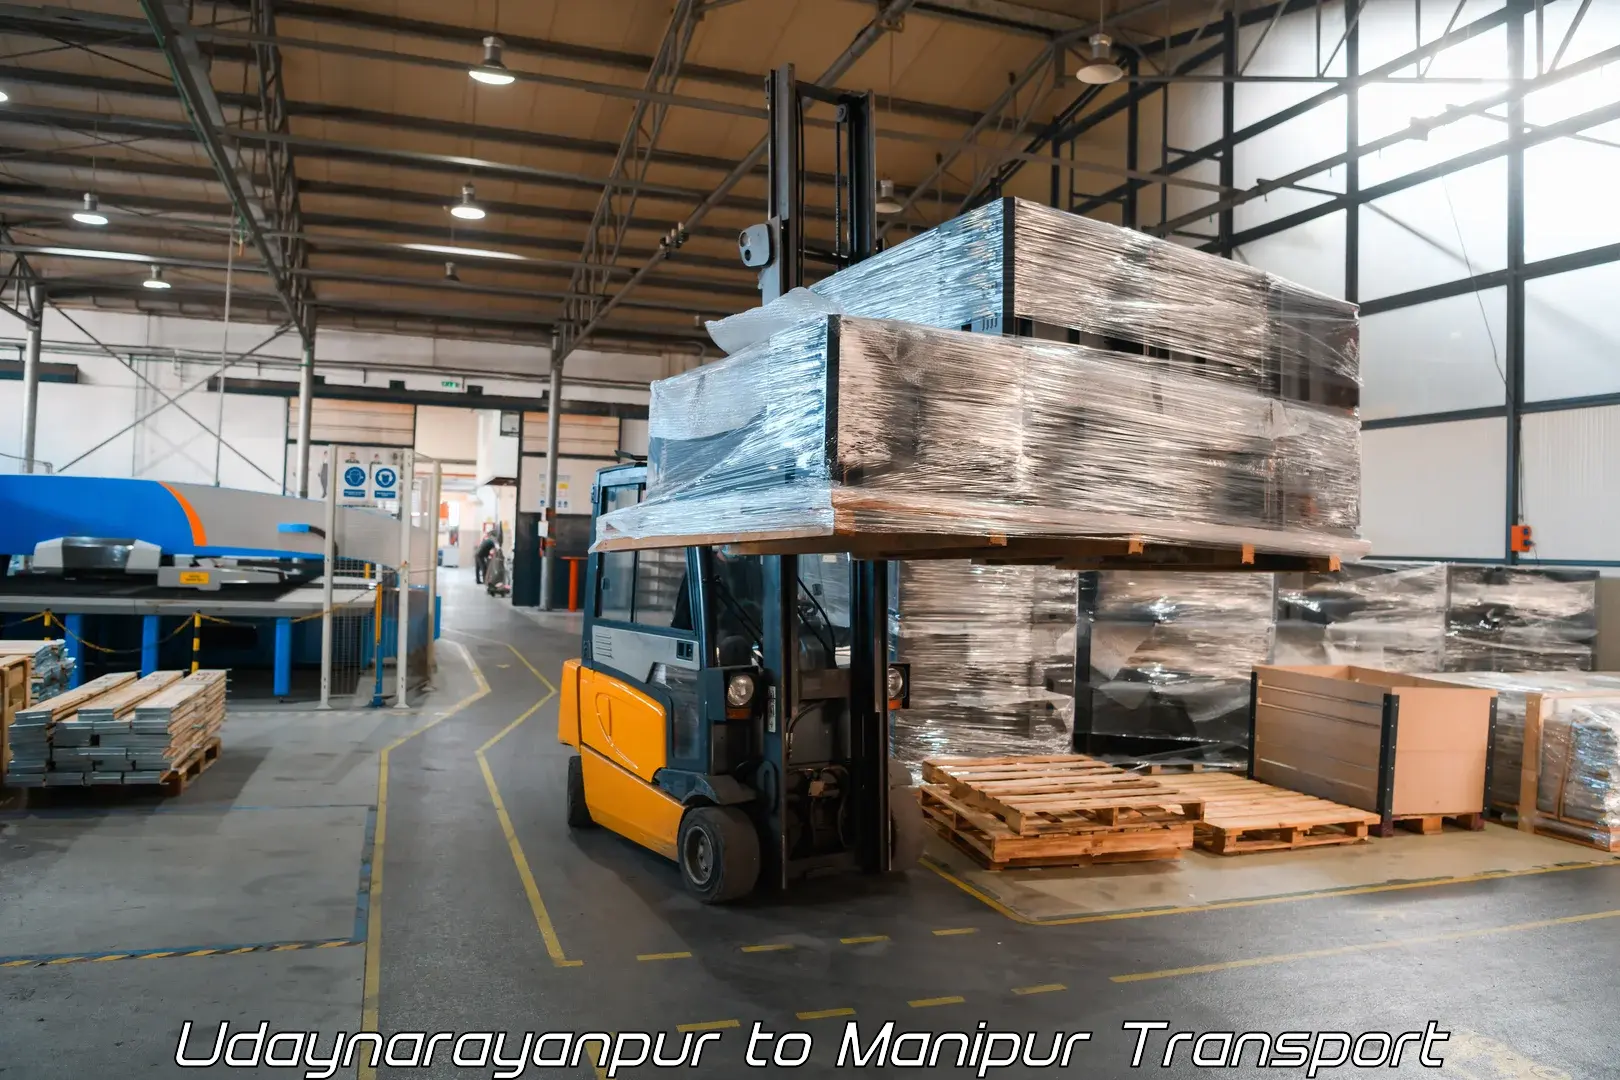 Air freight transport services Udaynarayanpur to Manipur